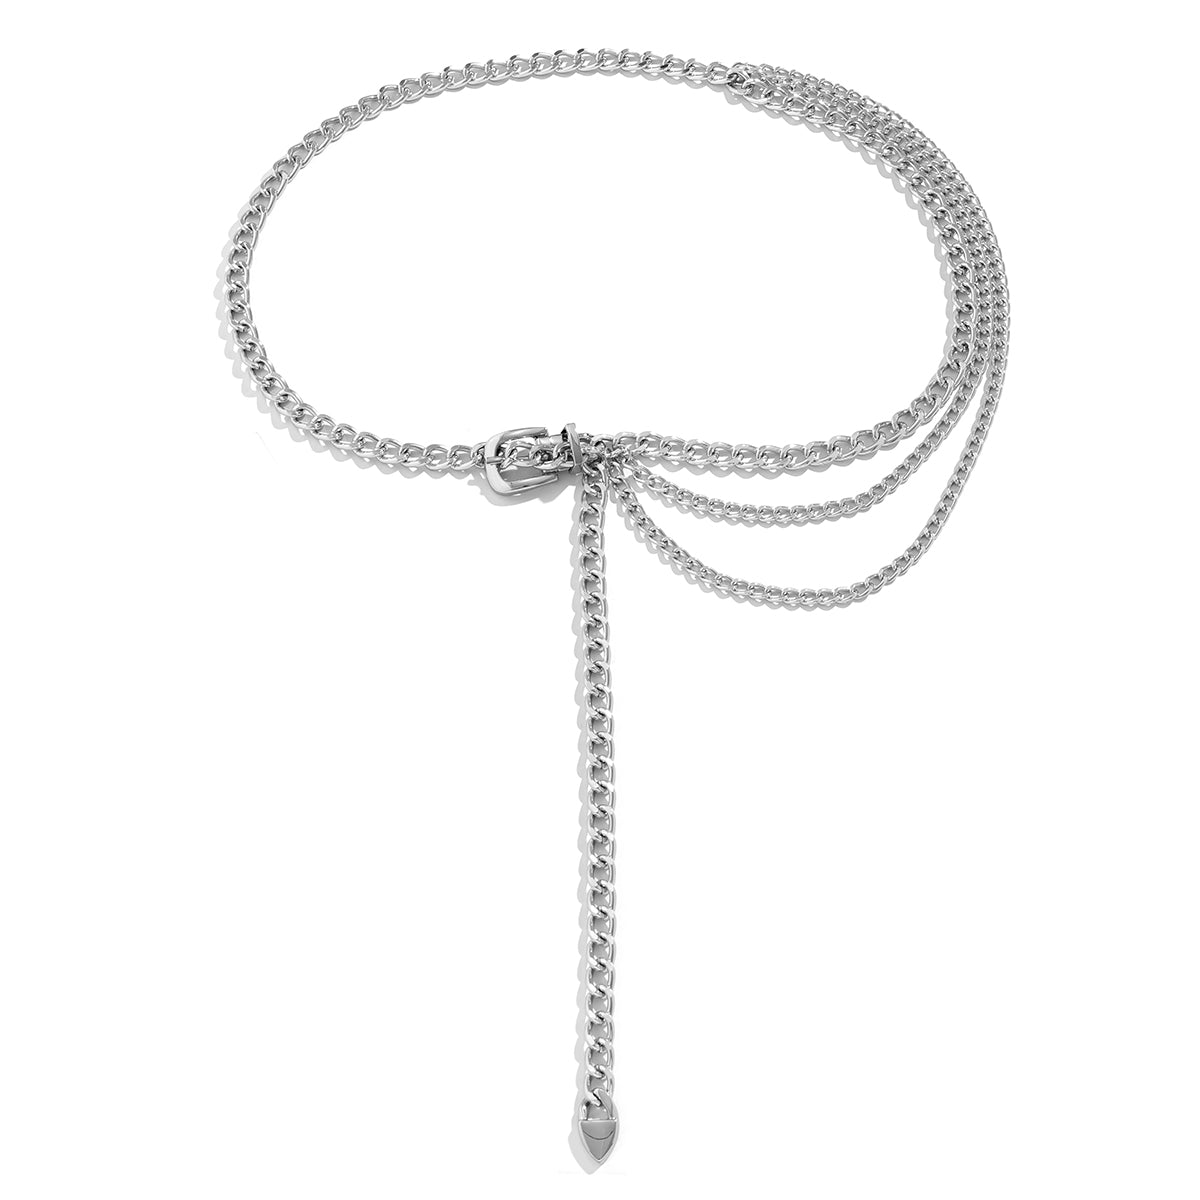 Silver-Plated Layered Lariat Waist Chain